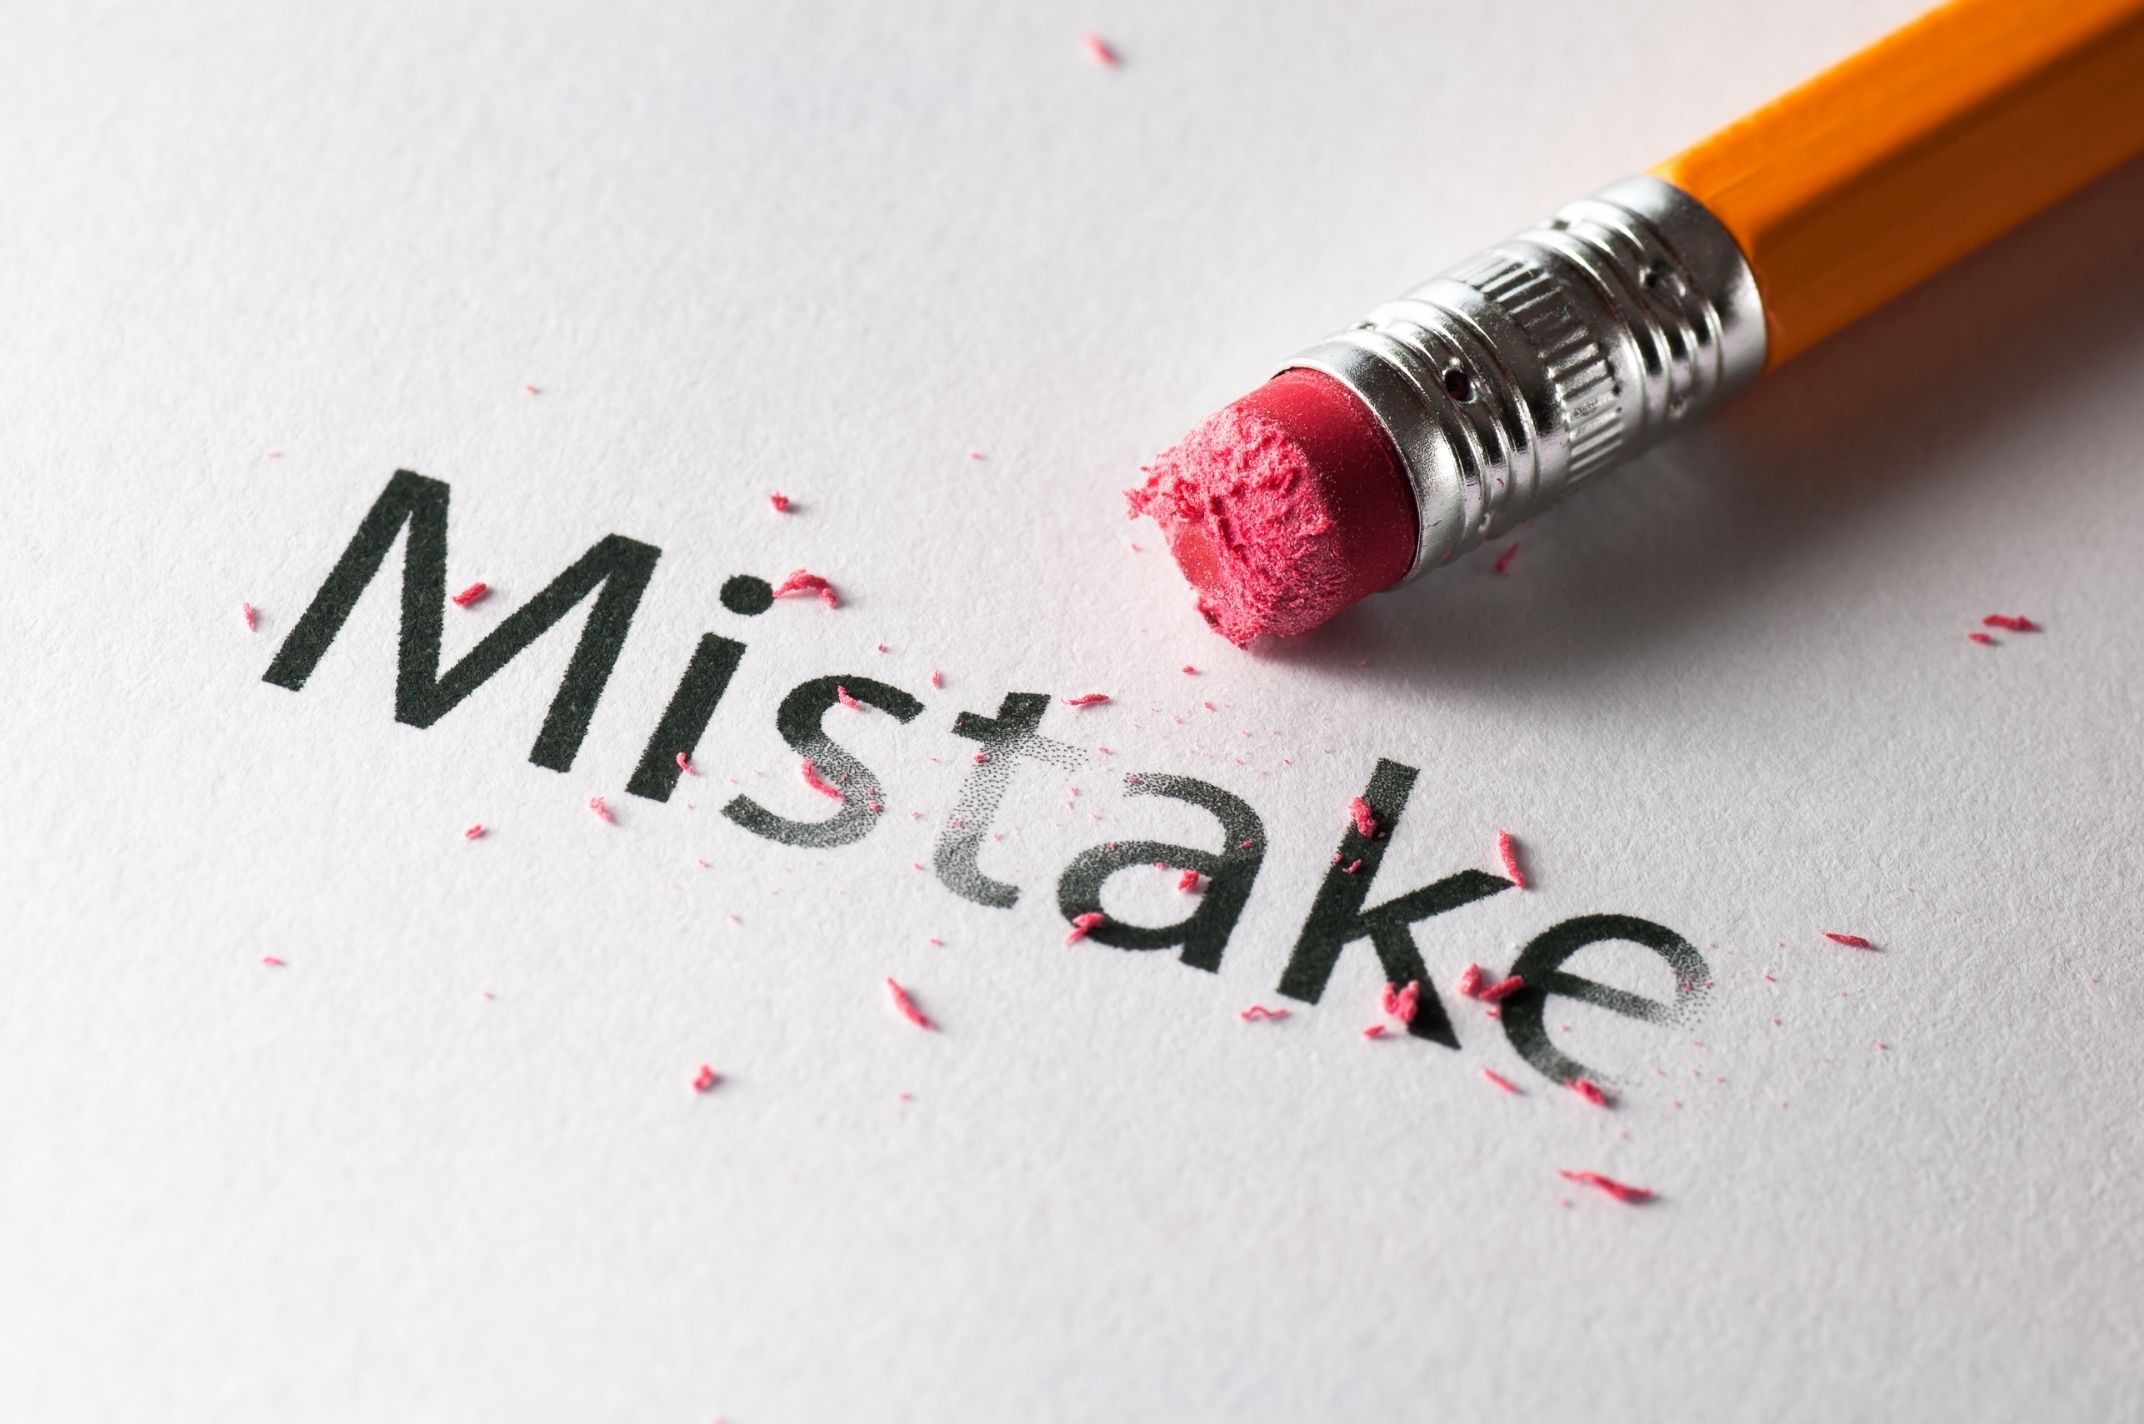 6 Common Business Loan Mistakes